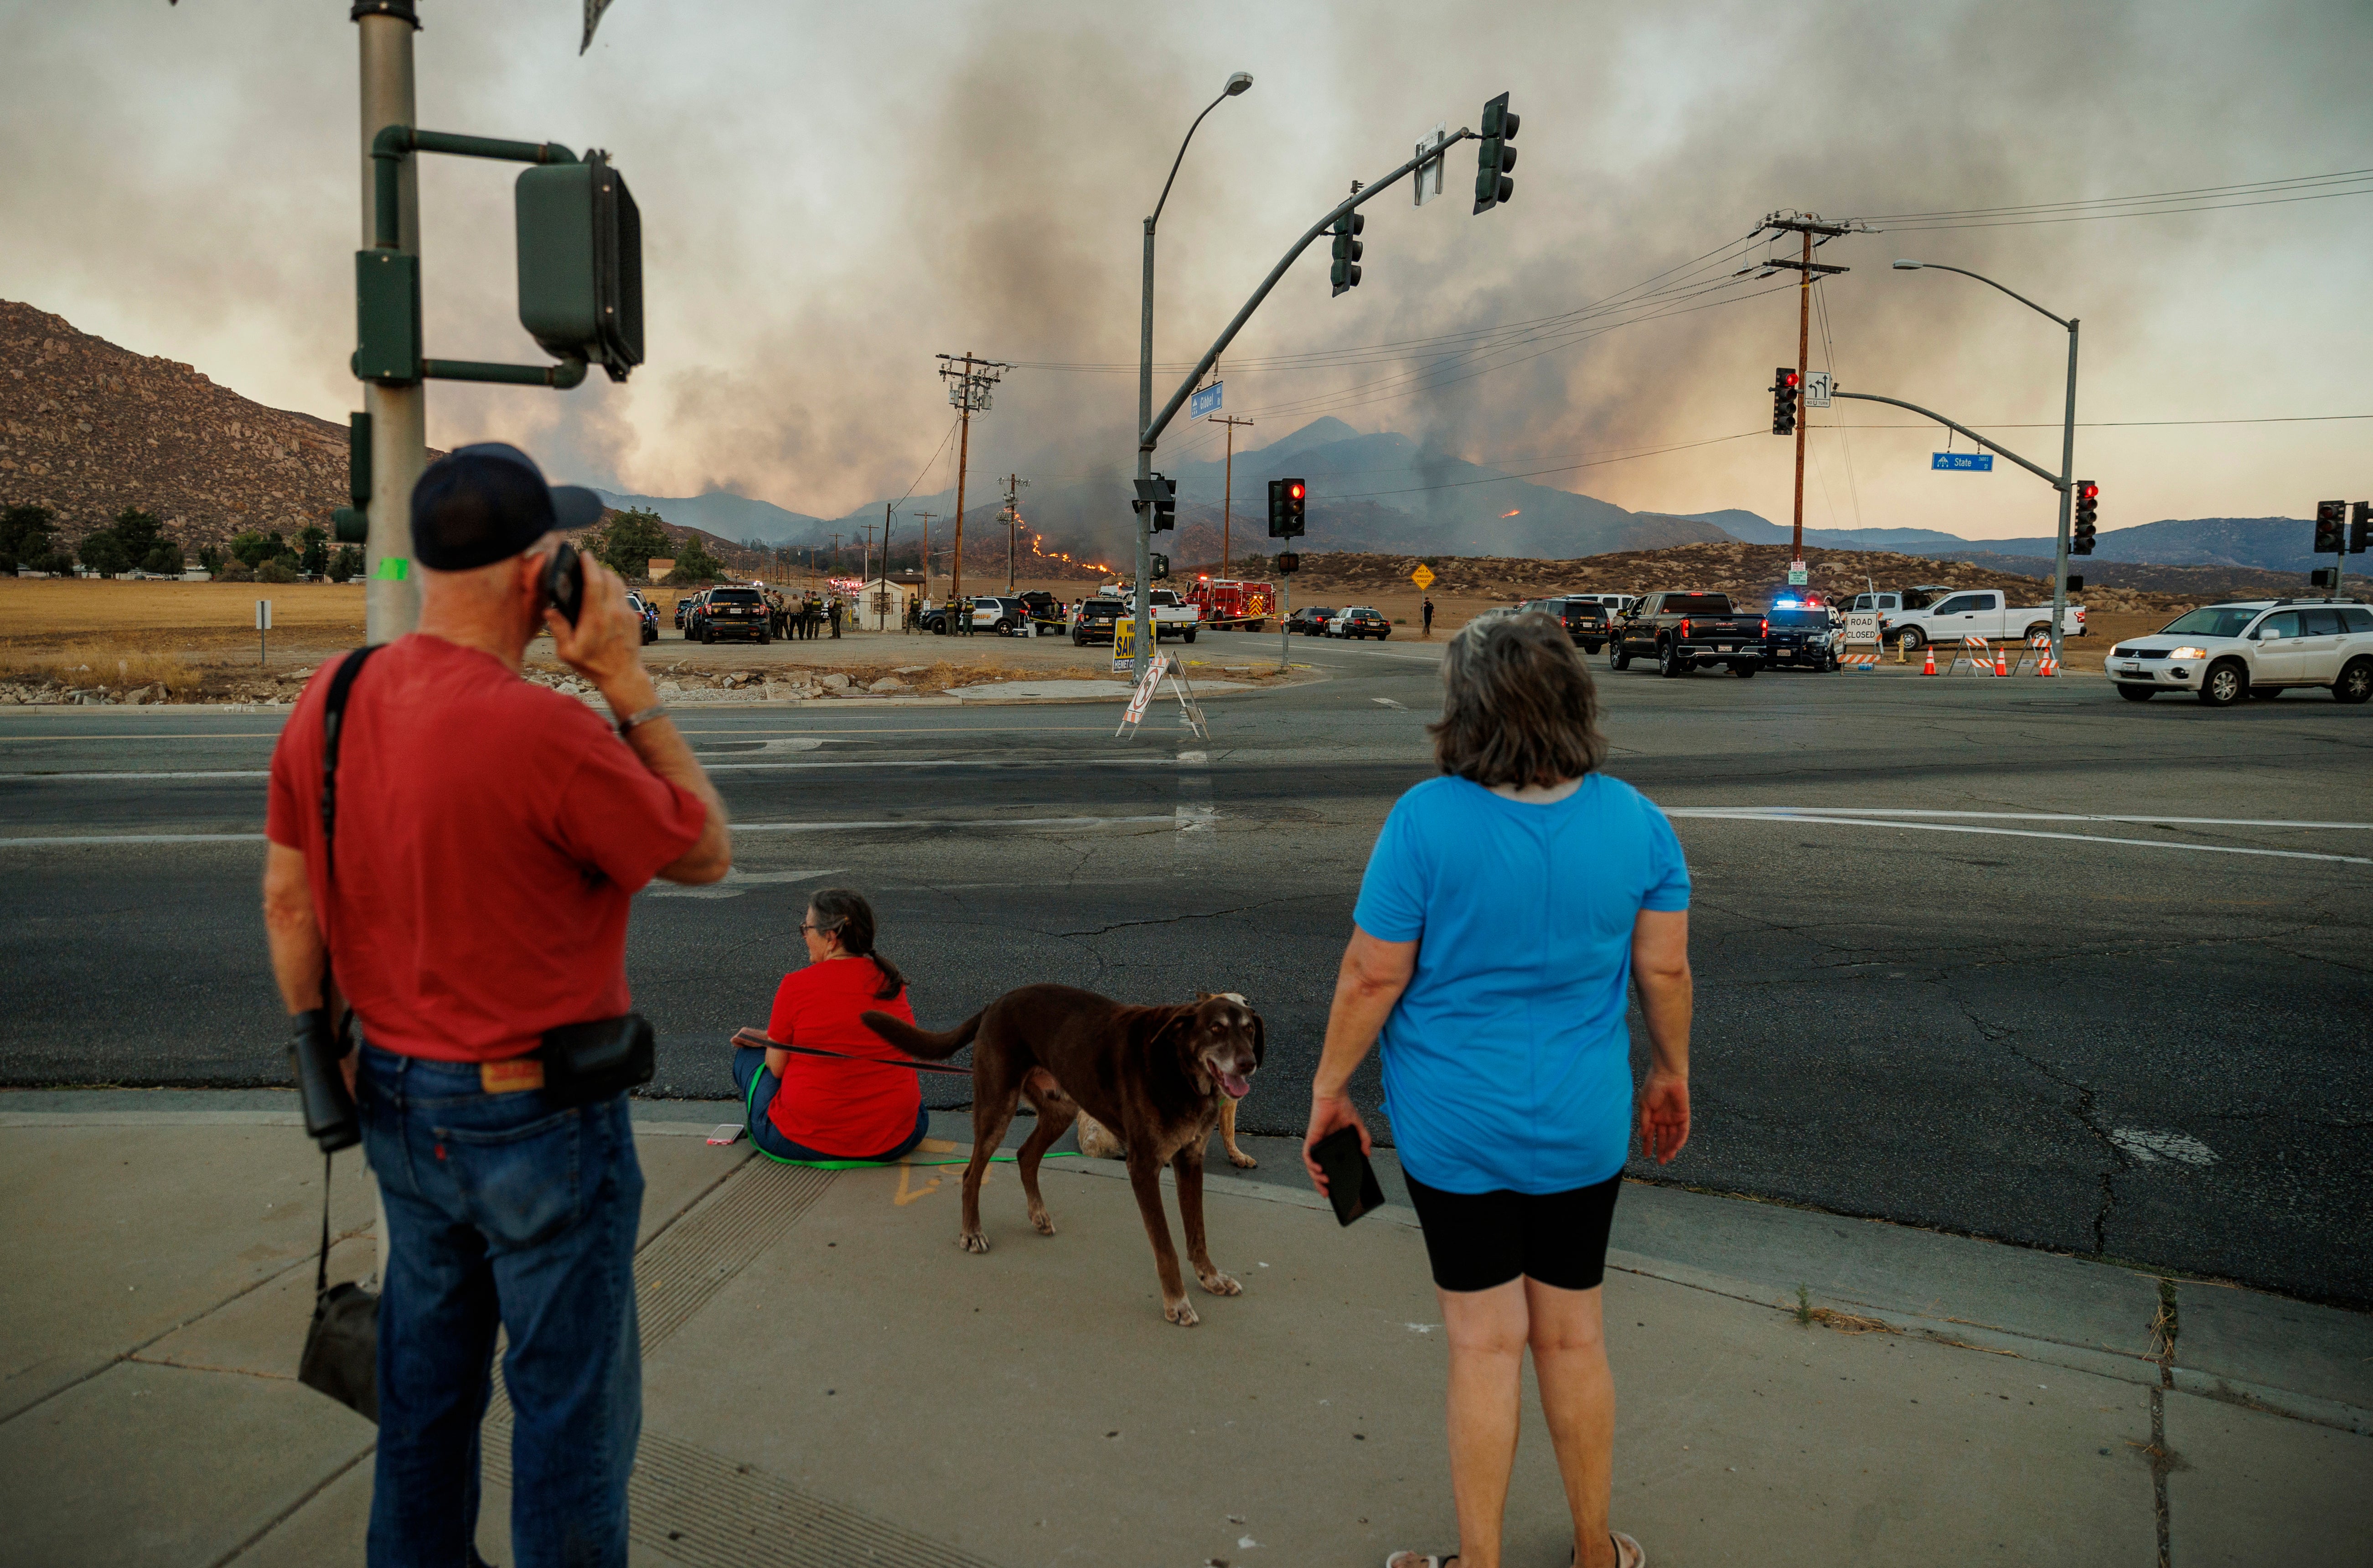 People watch a plume of smoke from the Fairview Fire from a distance on Monday, Sept. 5, 2022, near Hemet, California. (Photo: Ethan Swope, AP)